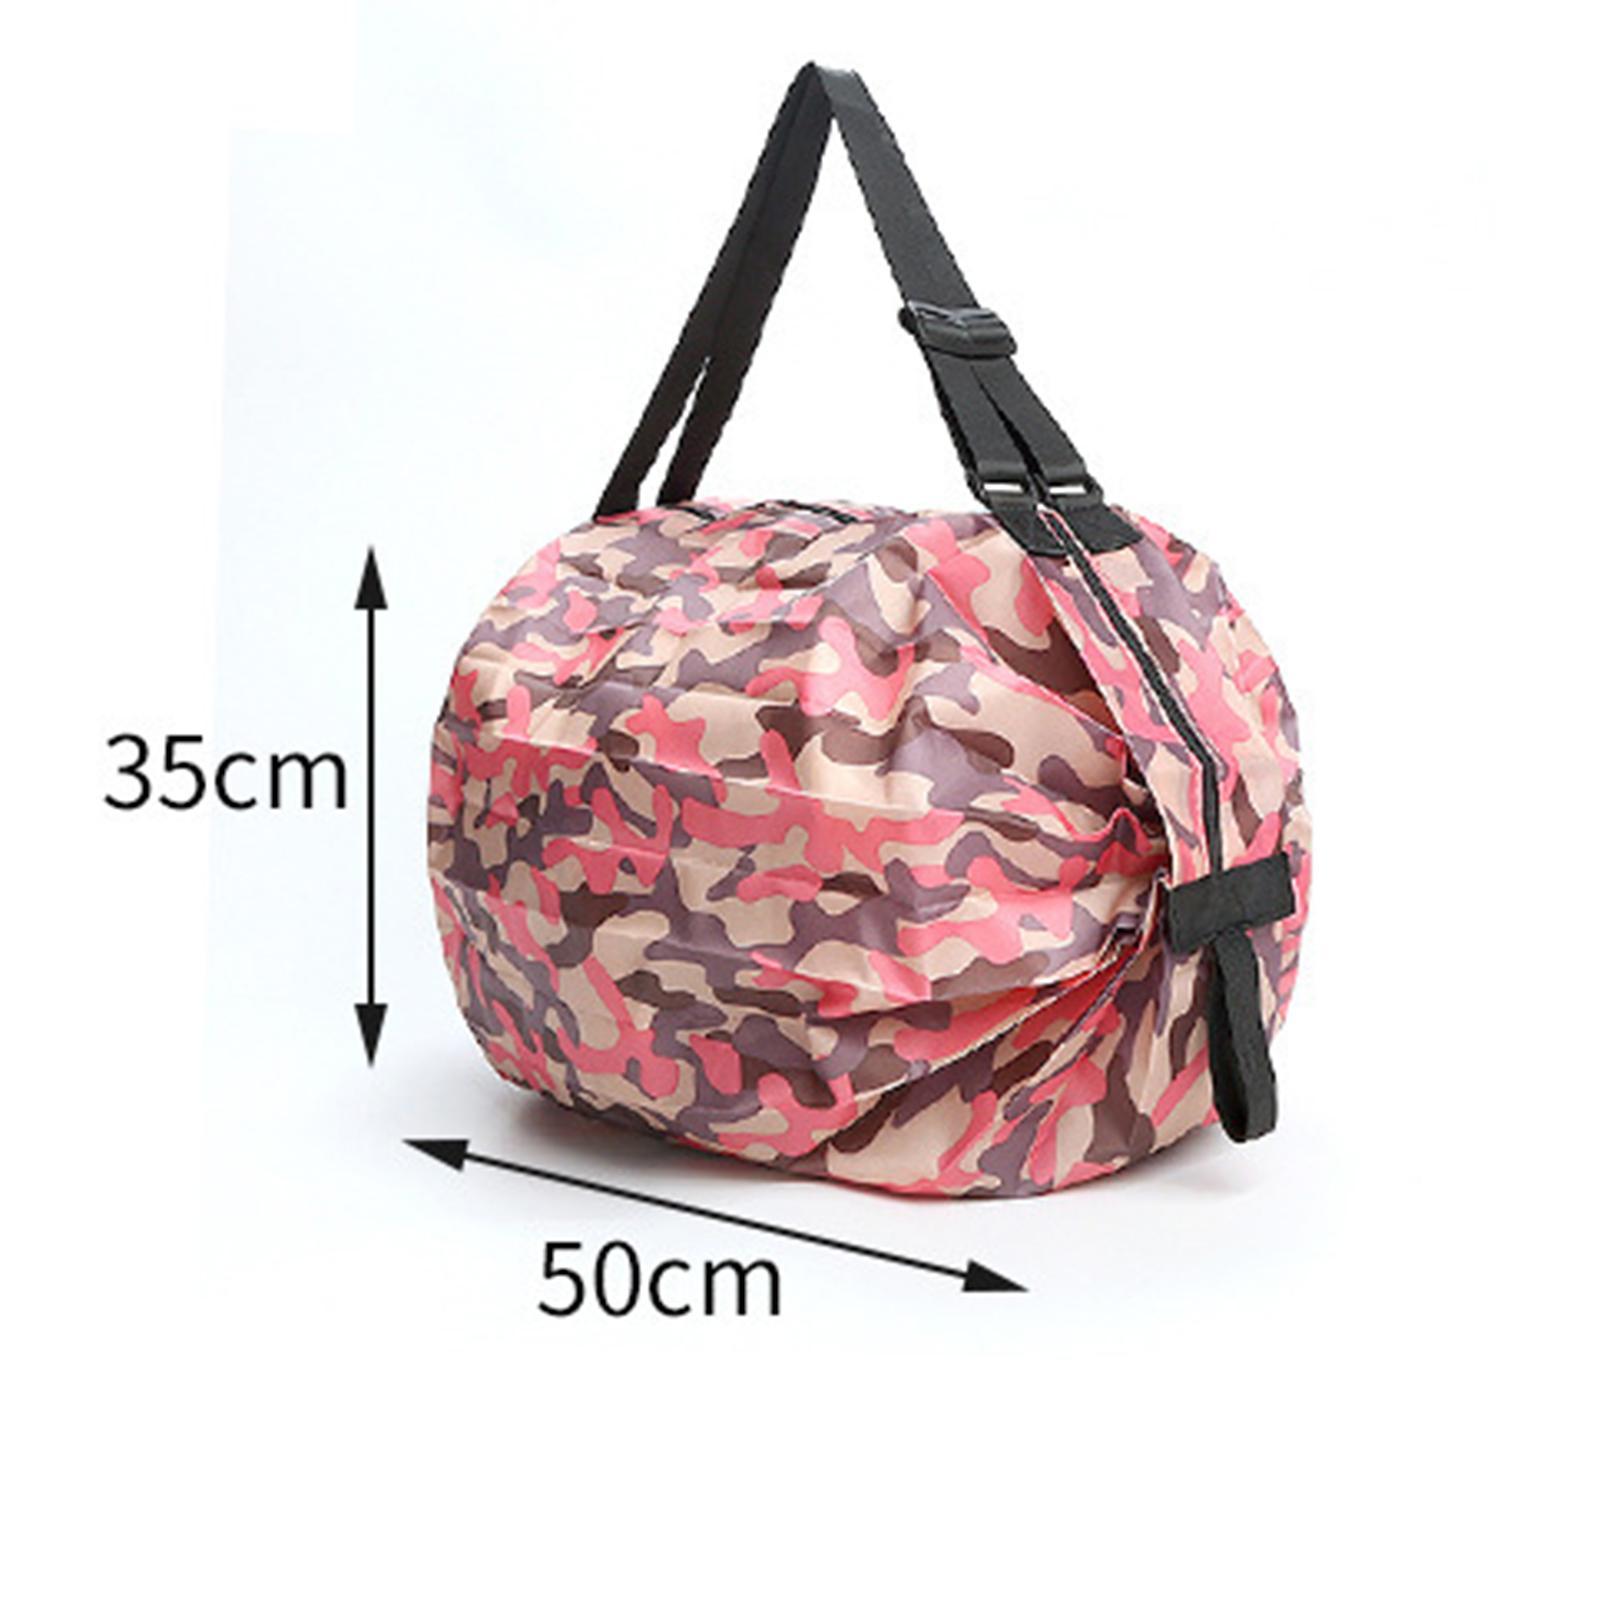 Shopping Bags Waterproof Foldable Grocery Bag Tote Portable Washable Convenient Outdoor Travel Storage Bag for Groceries Sports Beach Womens